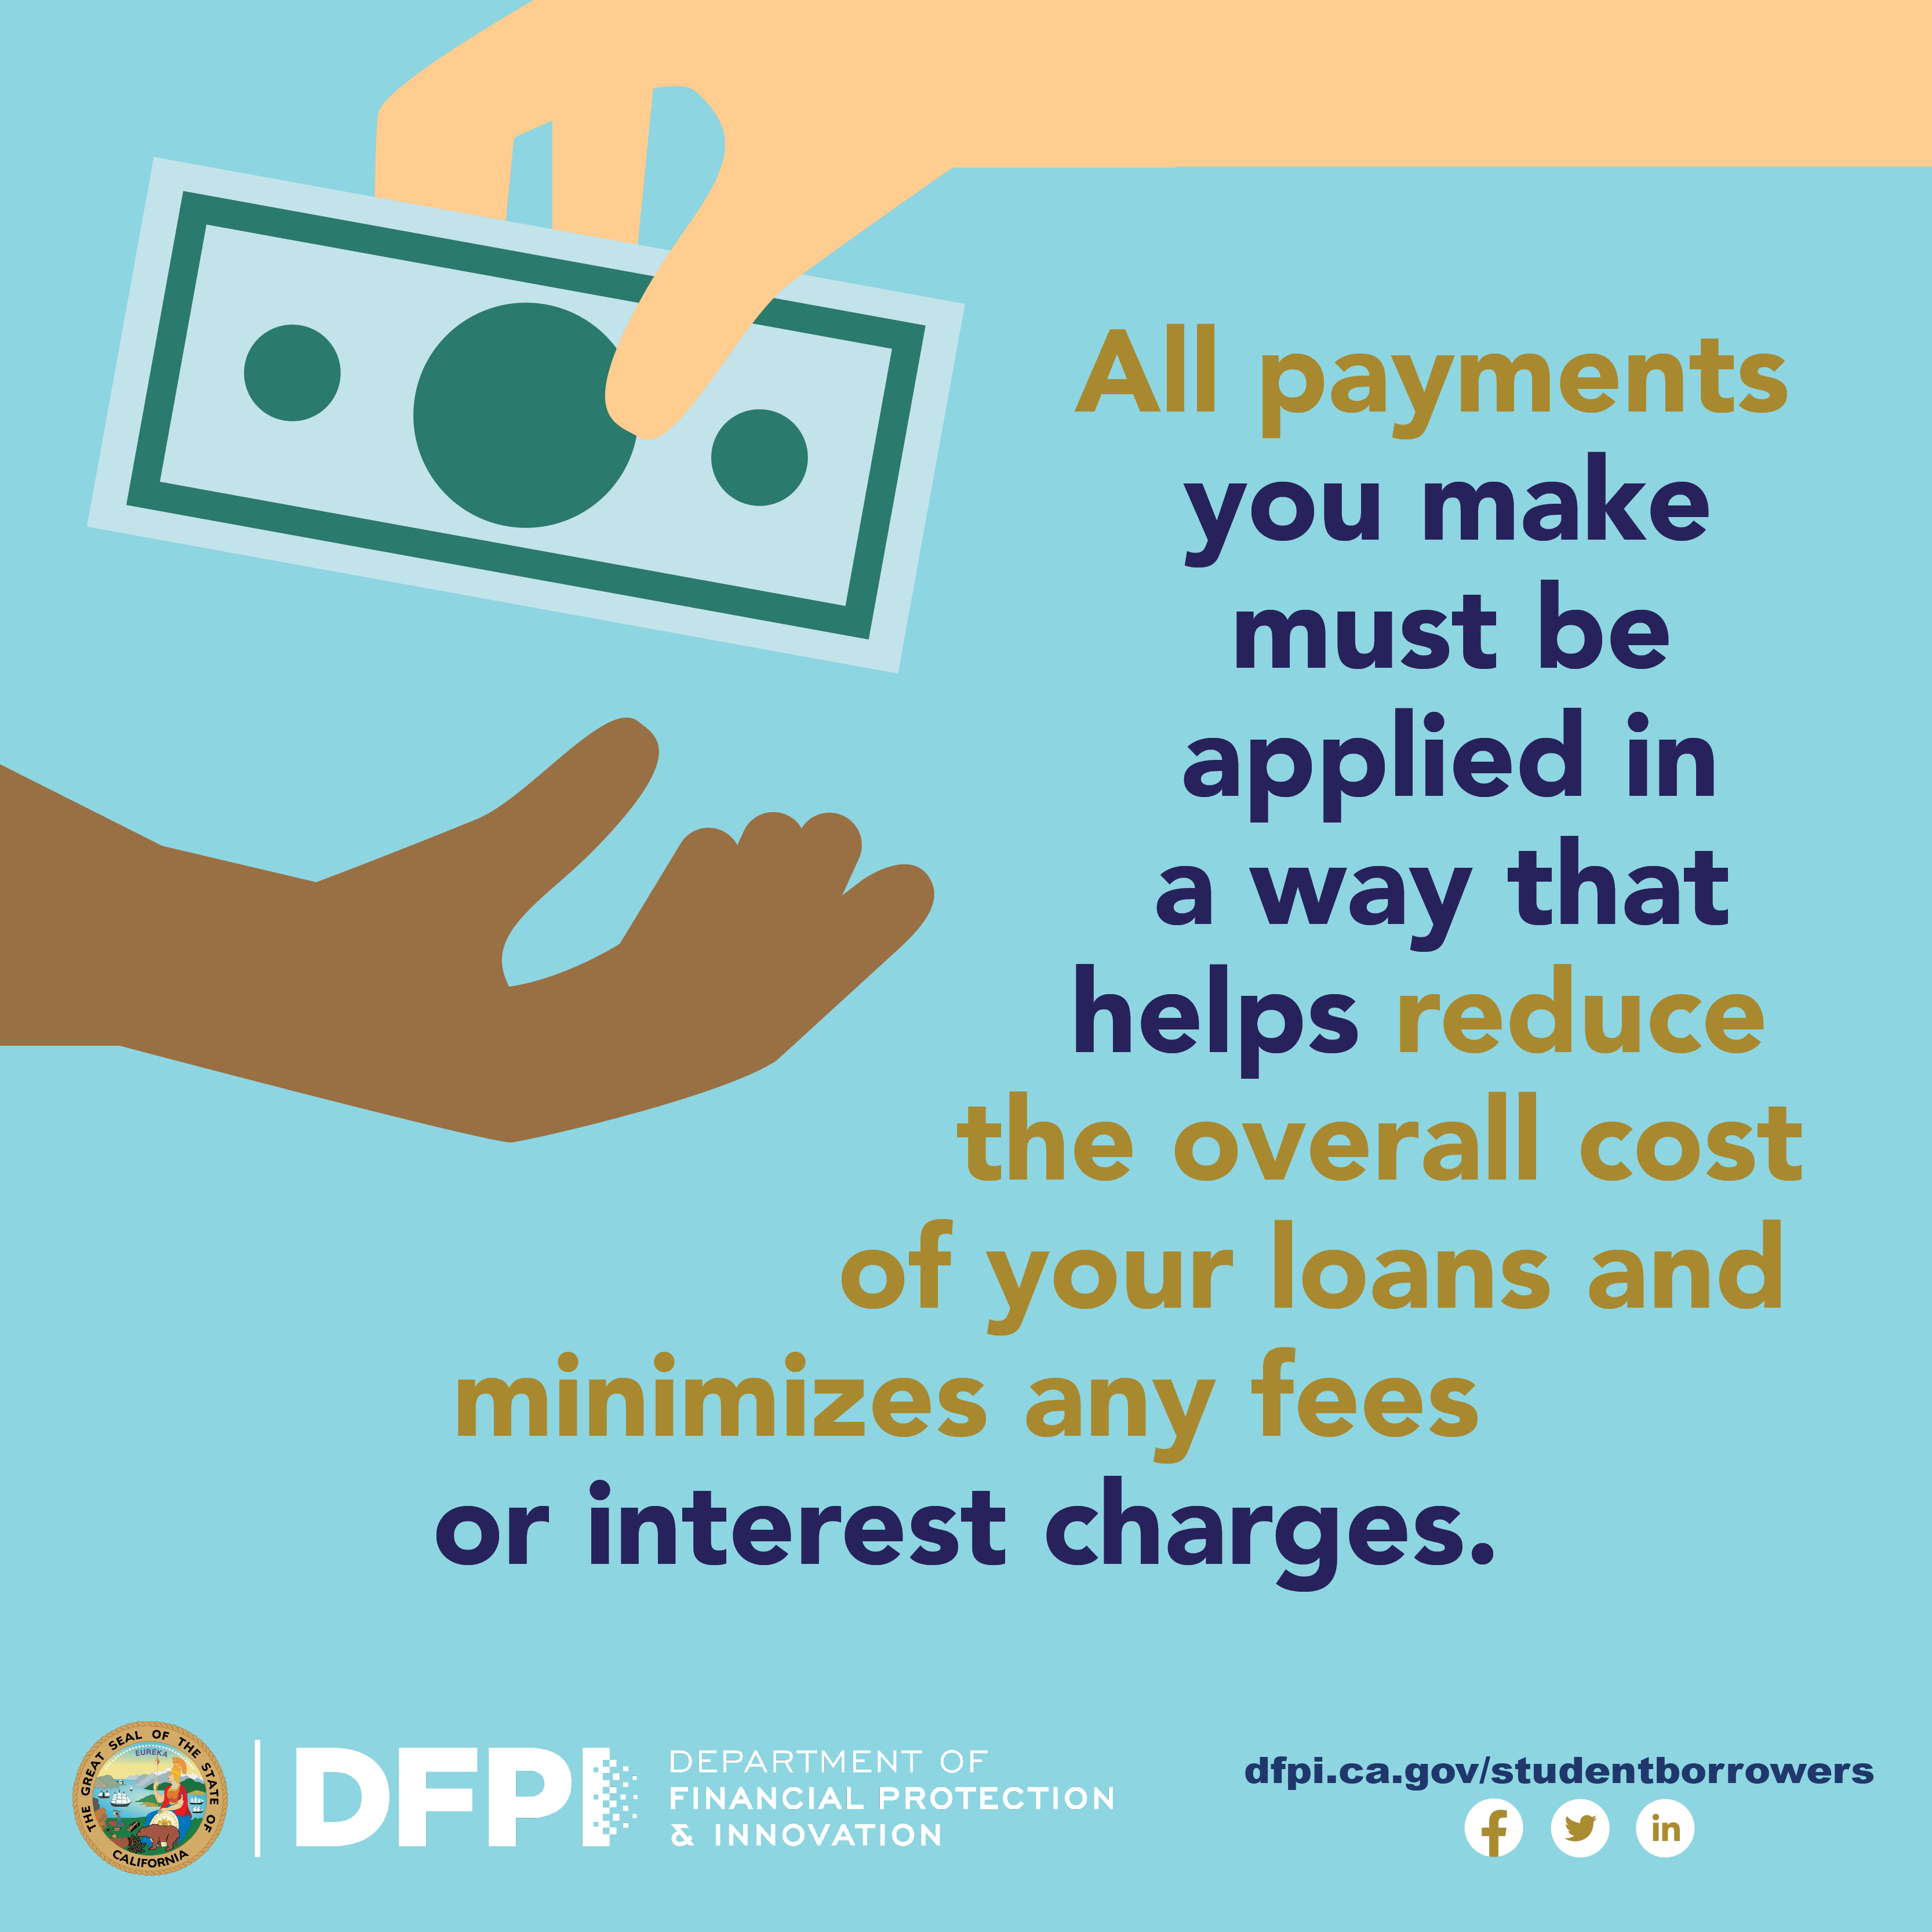 all payment you make must be applied in a way helps reduce overall cost of you loans and minimize fees or interest charges